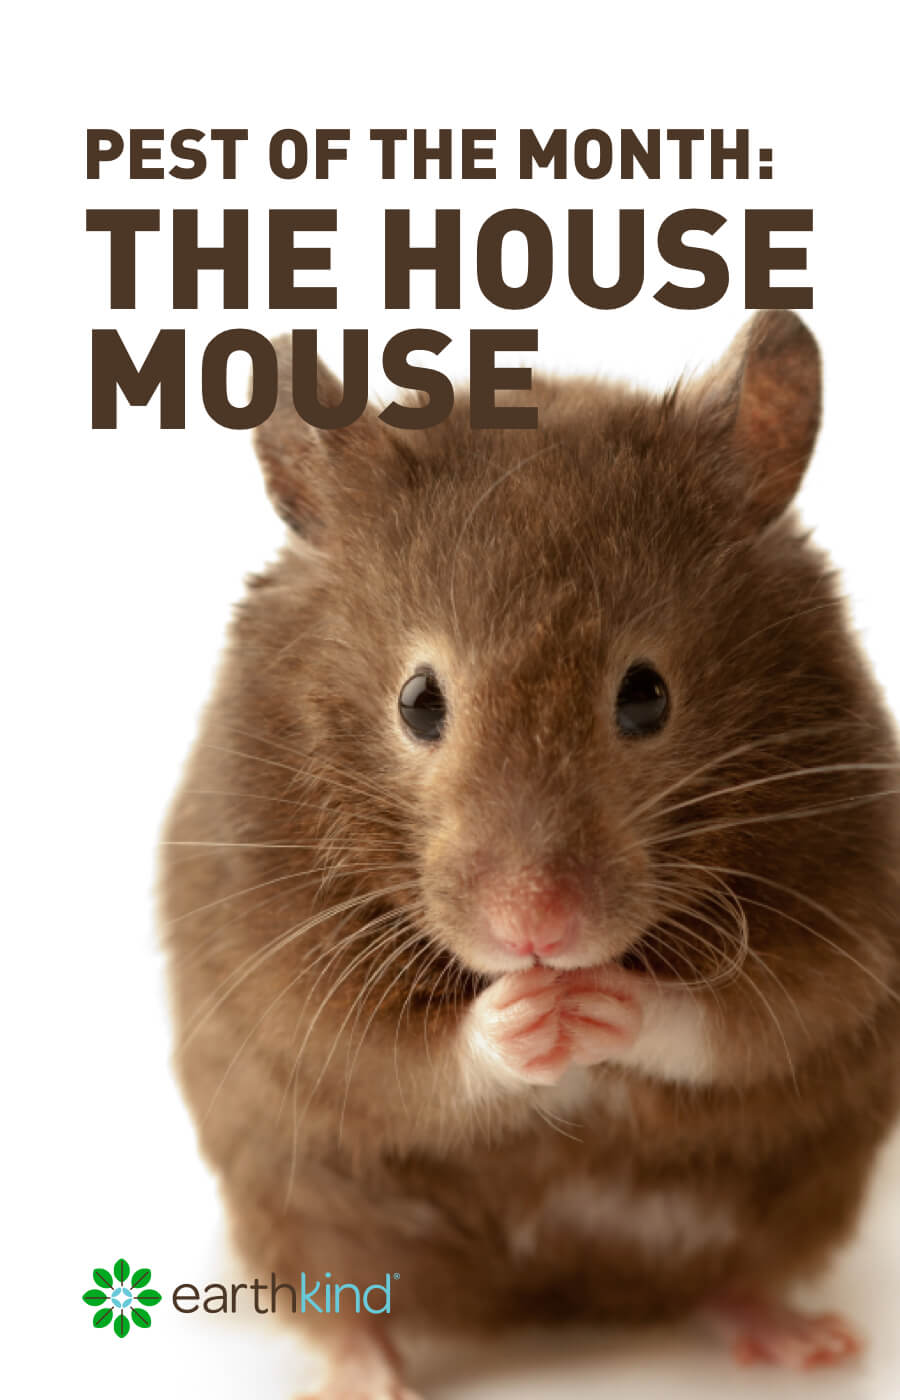 Pest of the month: The House Mouse